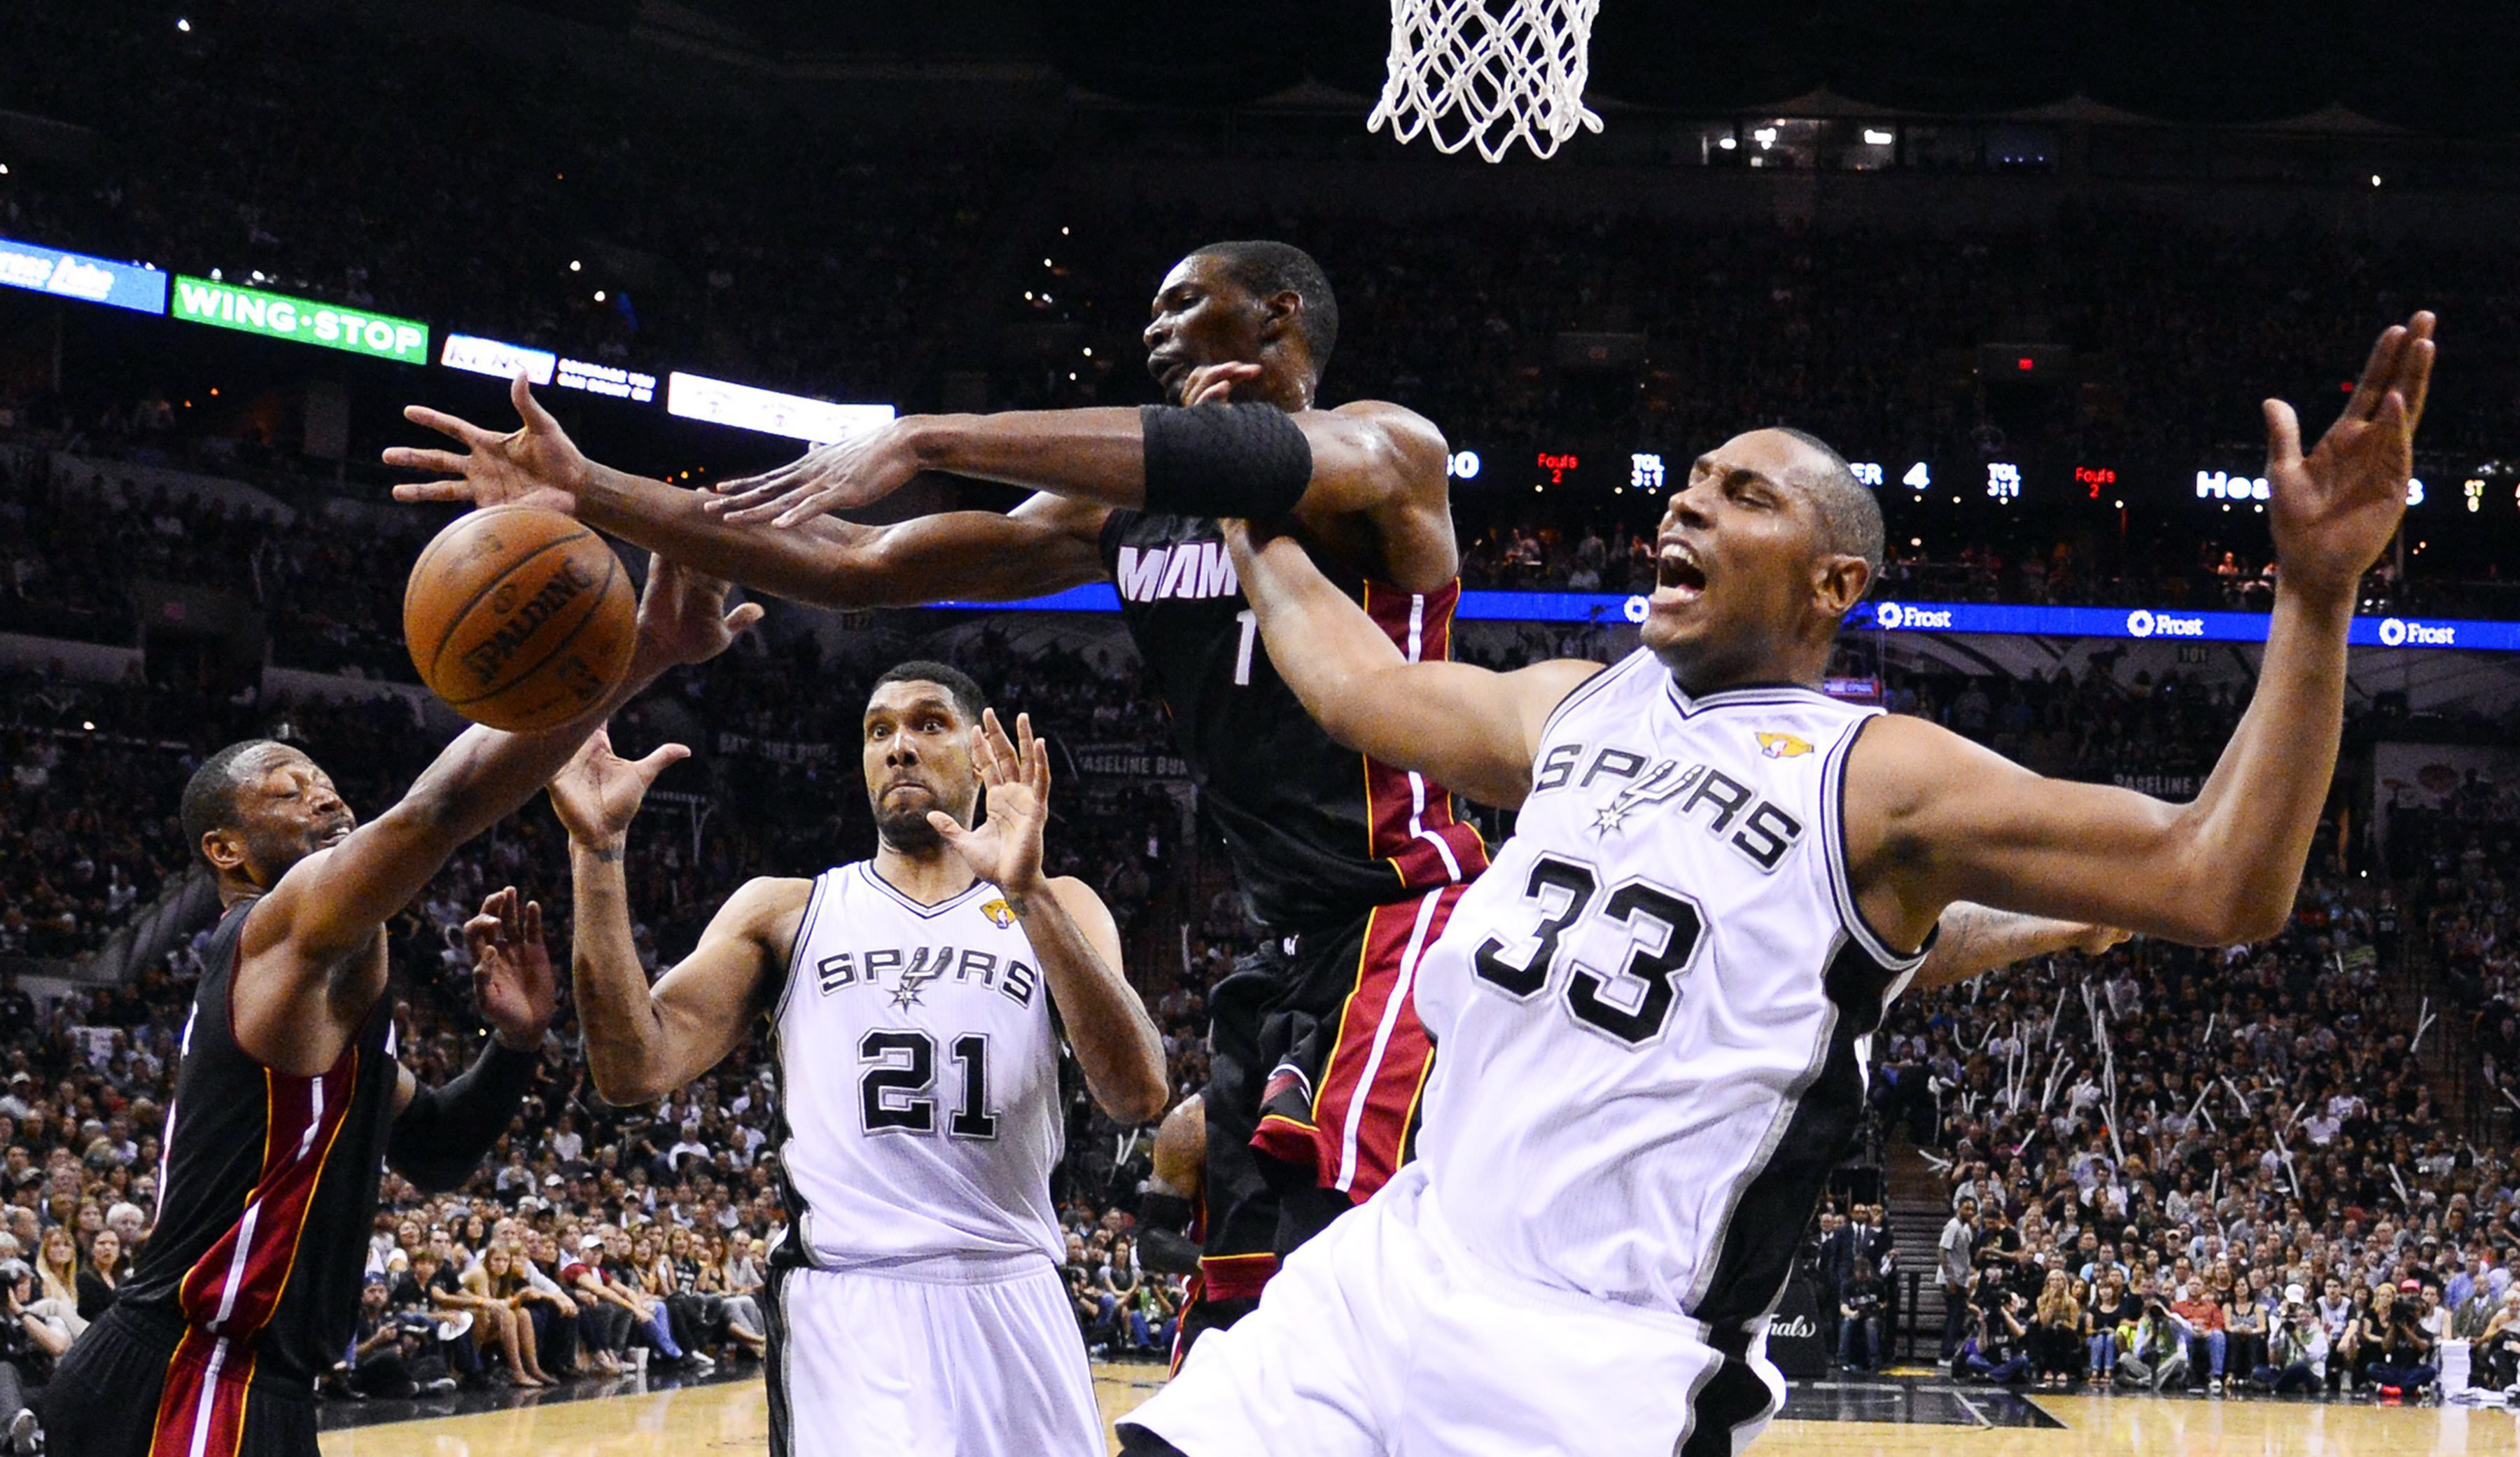 San Antonio Spurs player Boris Diaw (R) passes the ball to Tim Duncan (L) against Miami Heat player Chris Bosh (C) in the second half of the NBA Finals Game 2 in San Antonio on June 8, 2014.